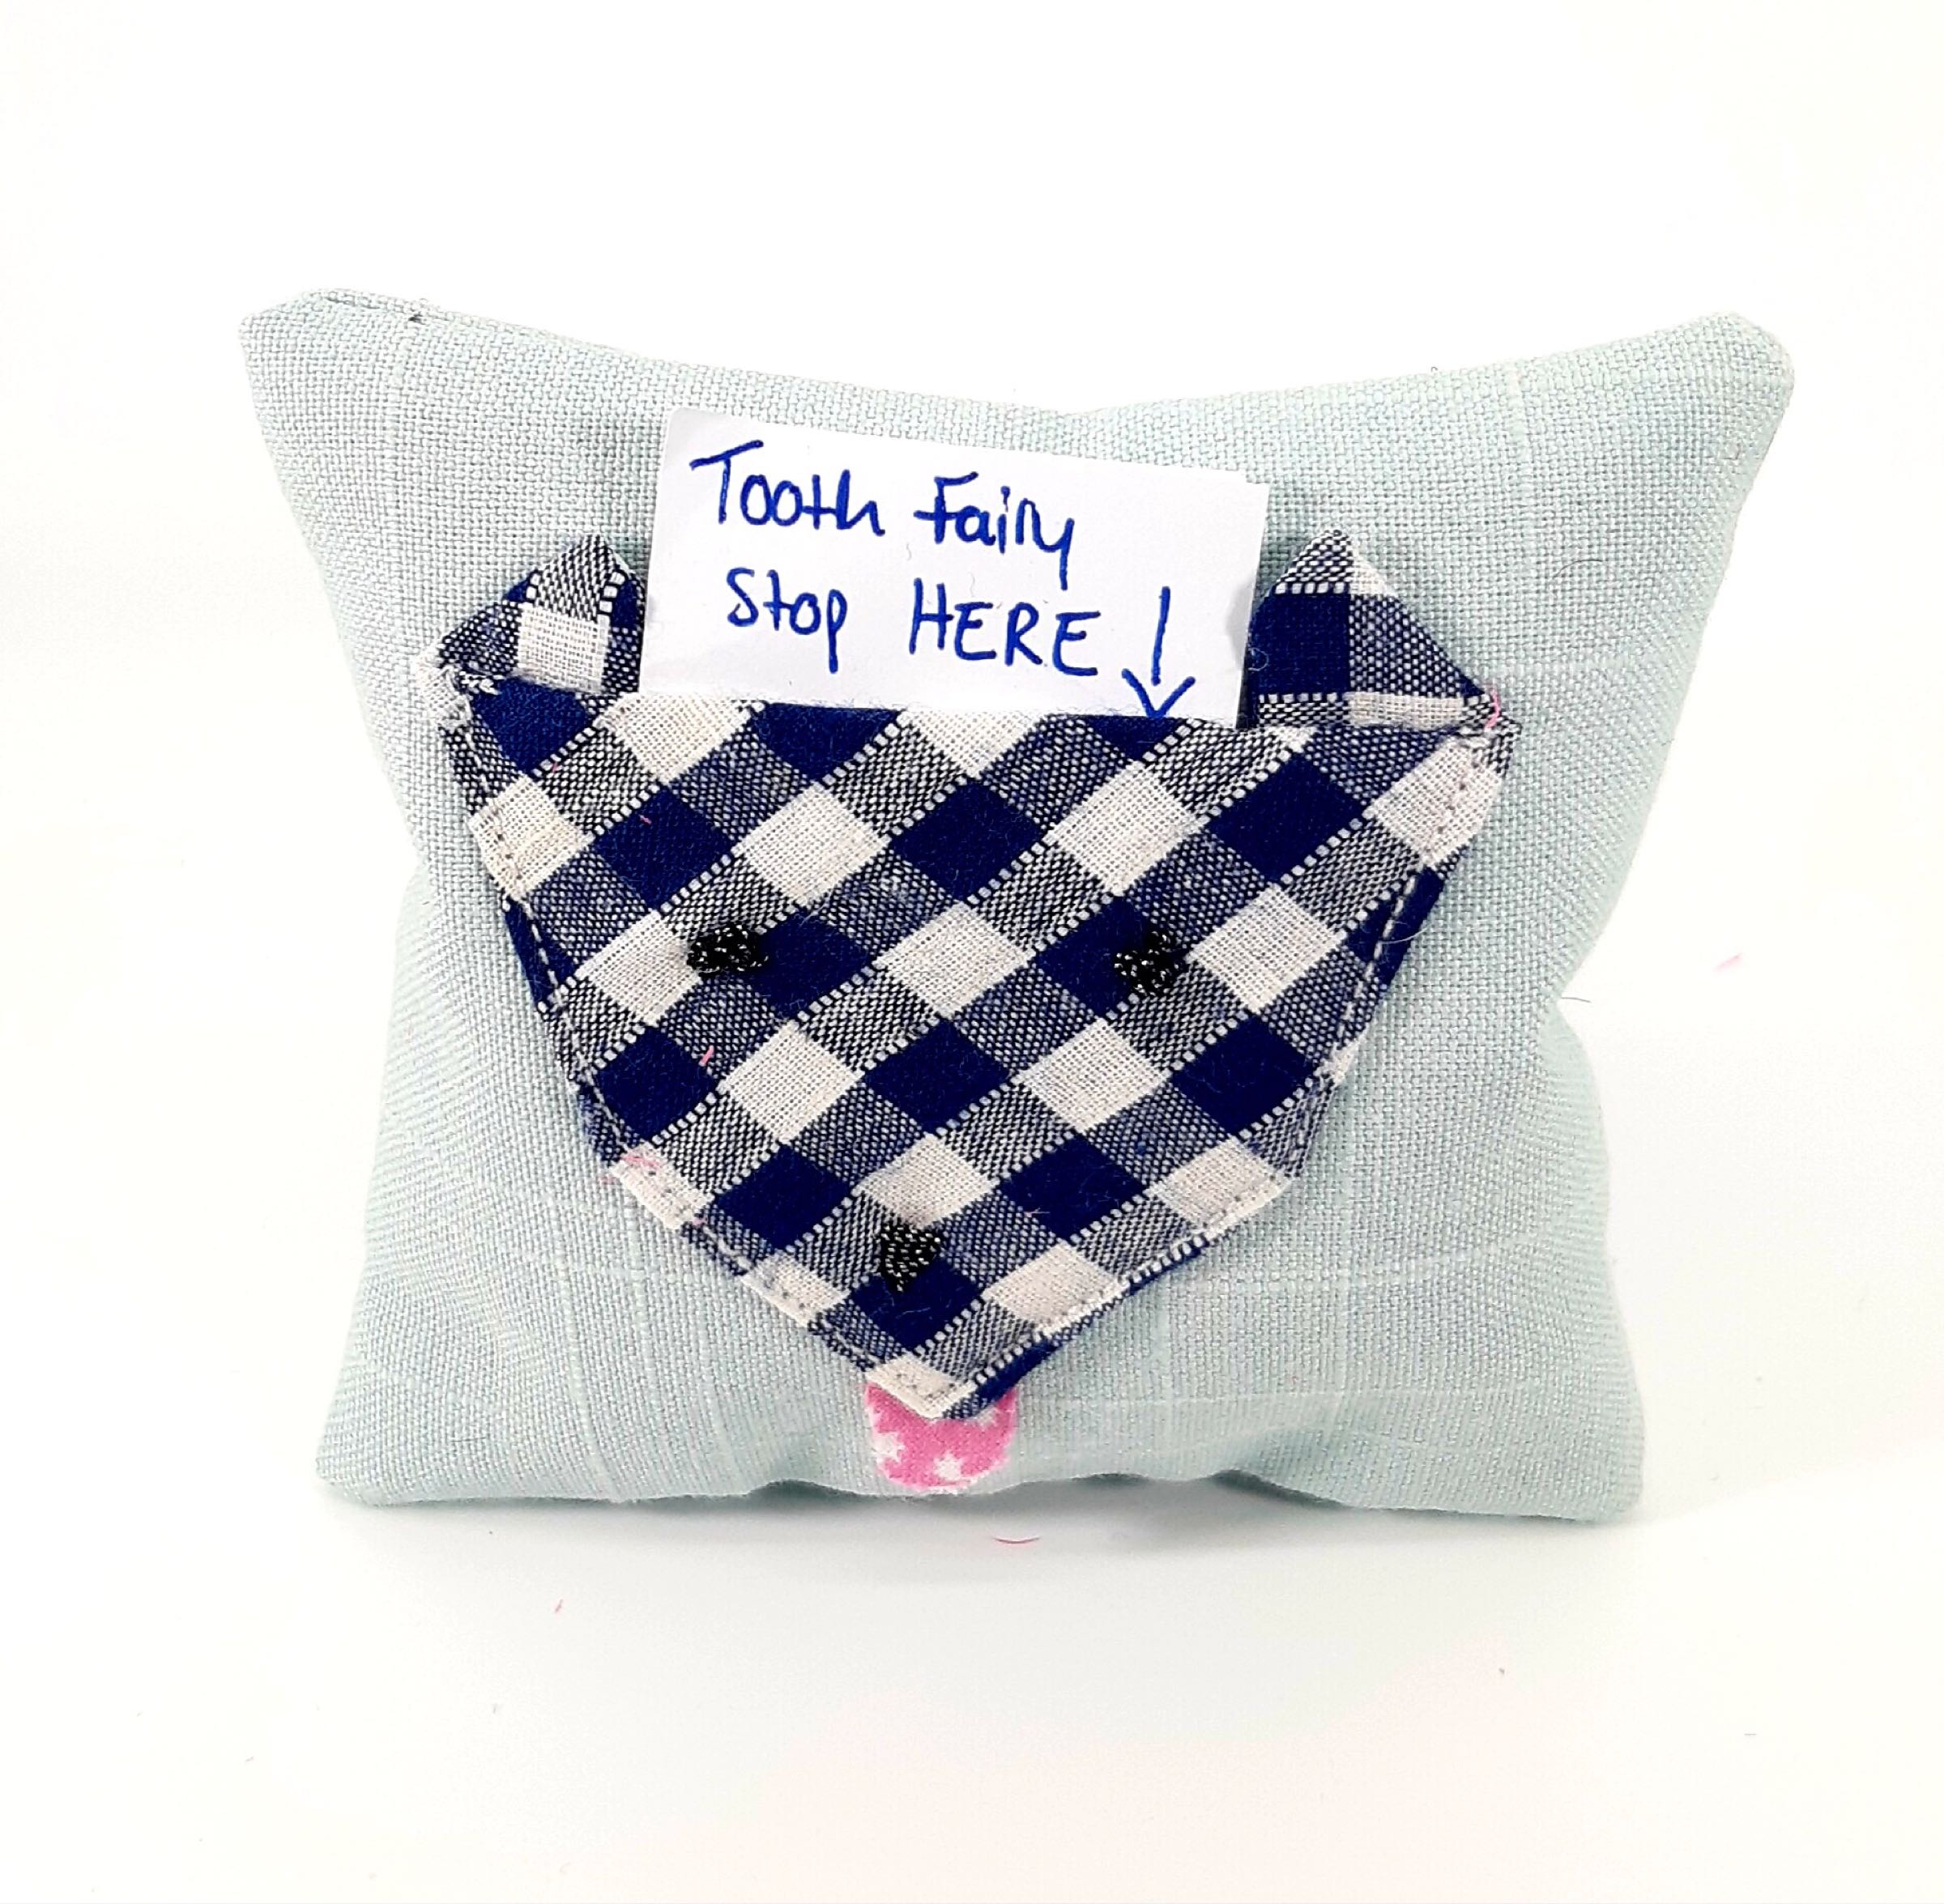 Origami Tooth Pillow